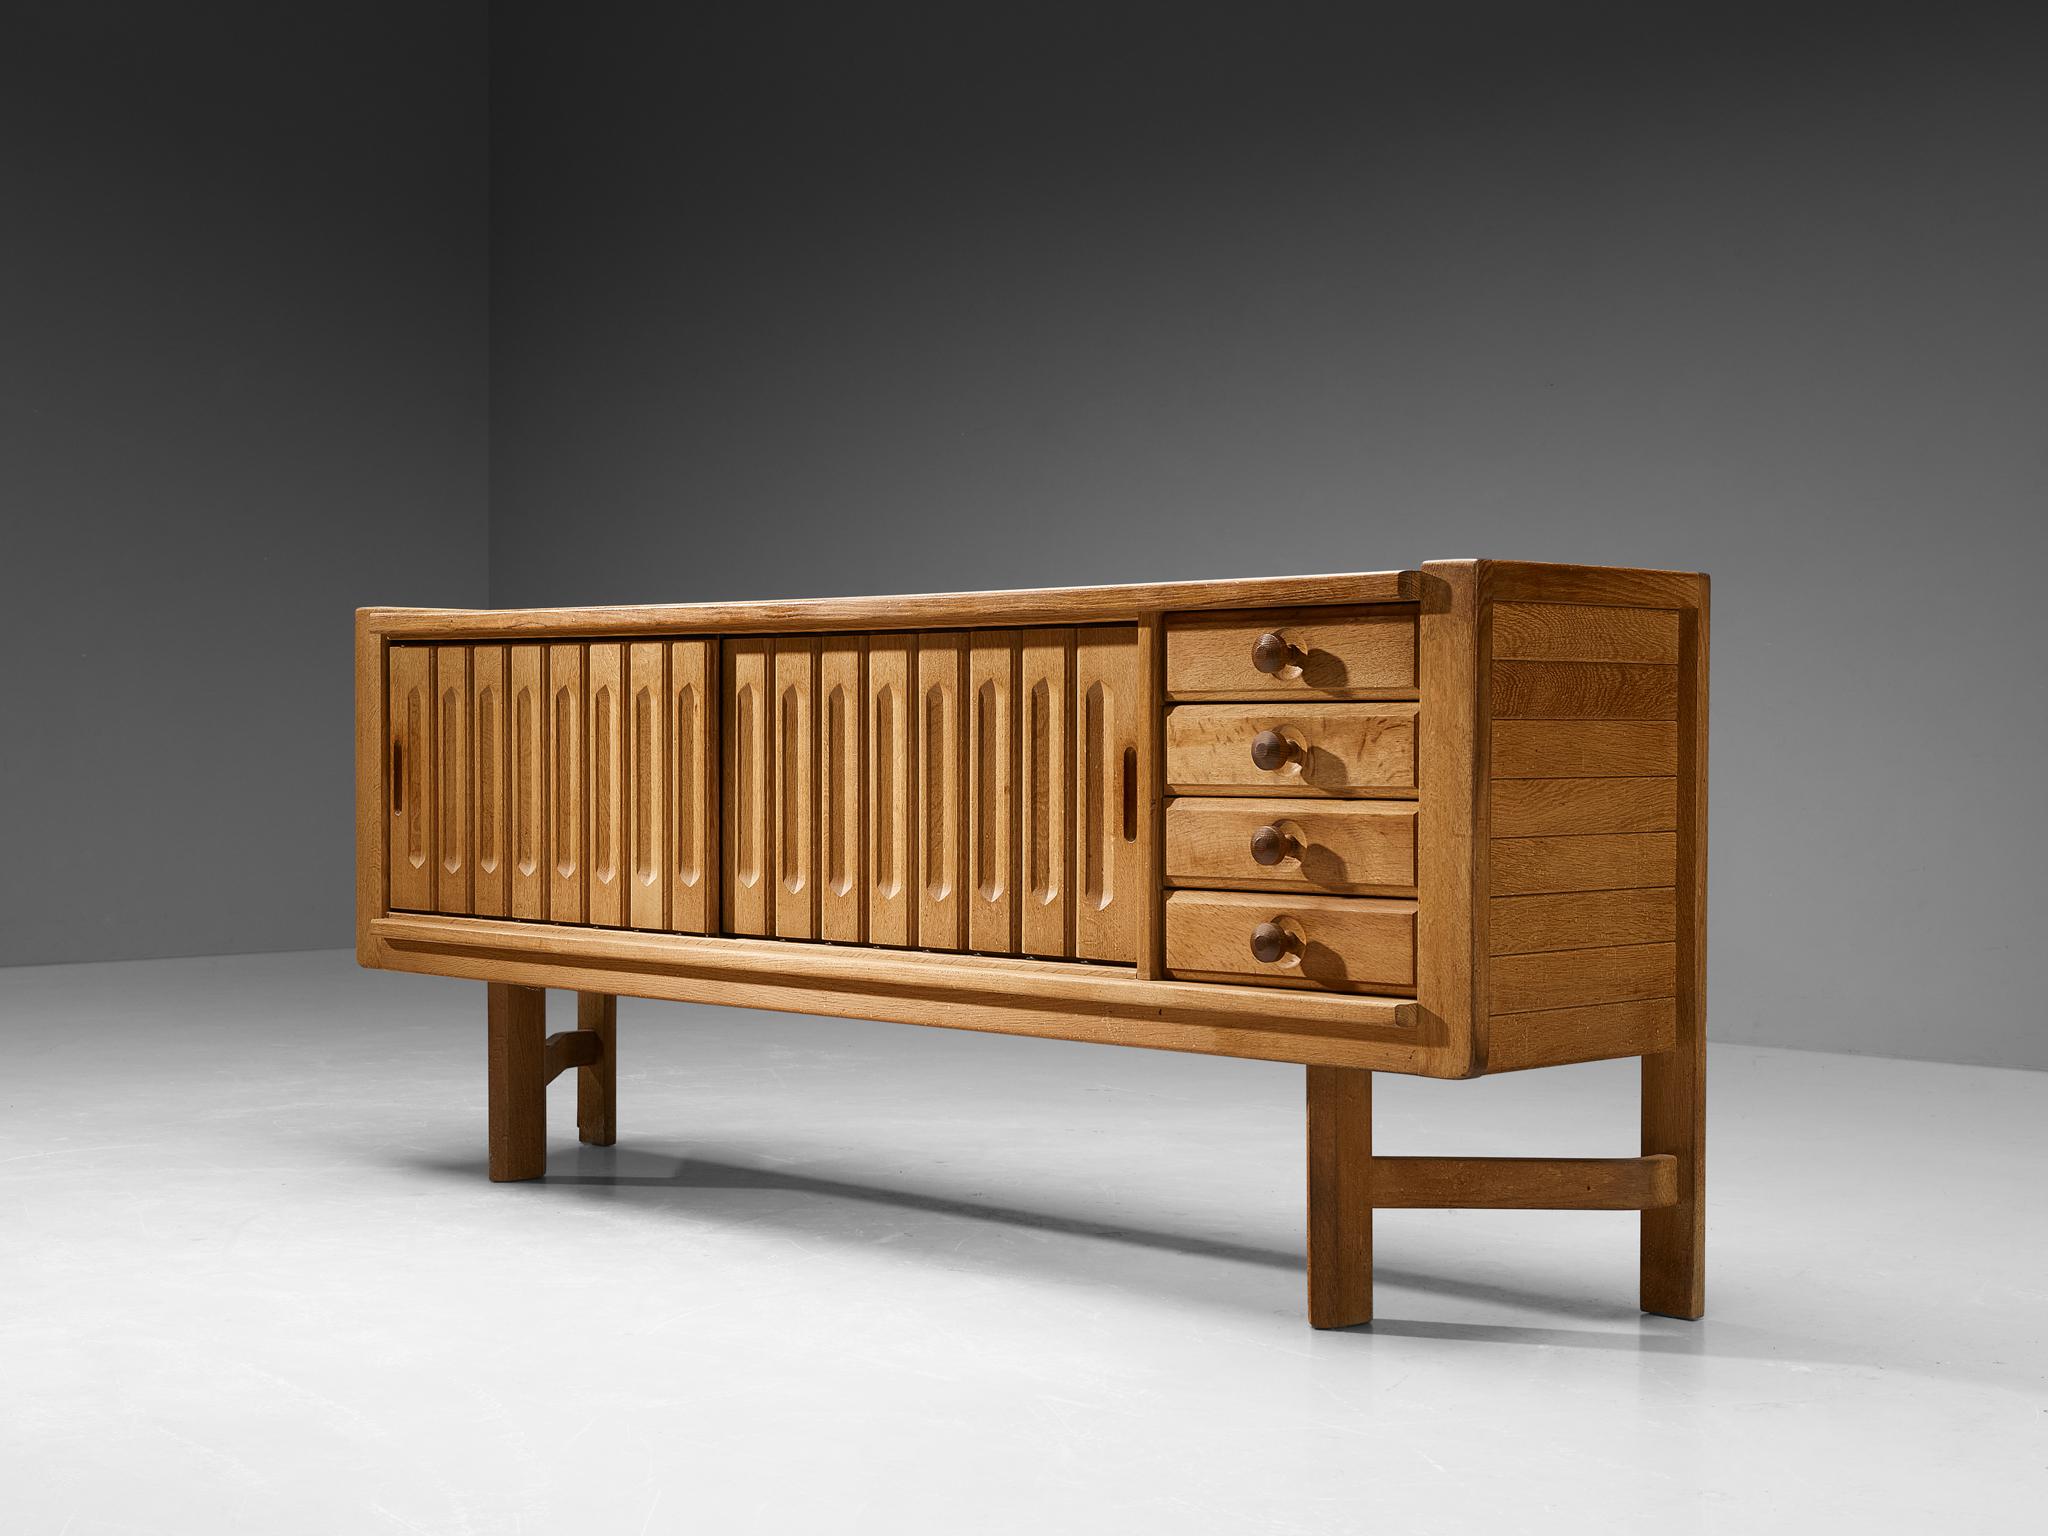 Guillerme et Chambron for Votre Maison, sideboard, oak, France, 1960s

This functional credenza is based on a well-designed structure where aesthetics and functionally come hand in hand. The front holds the characteristics of the French designer